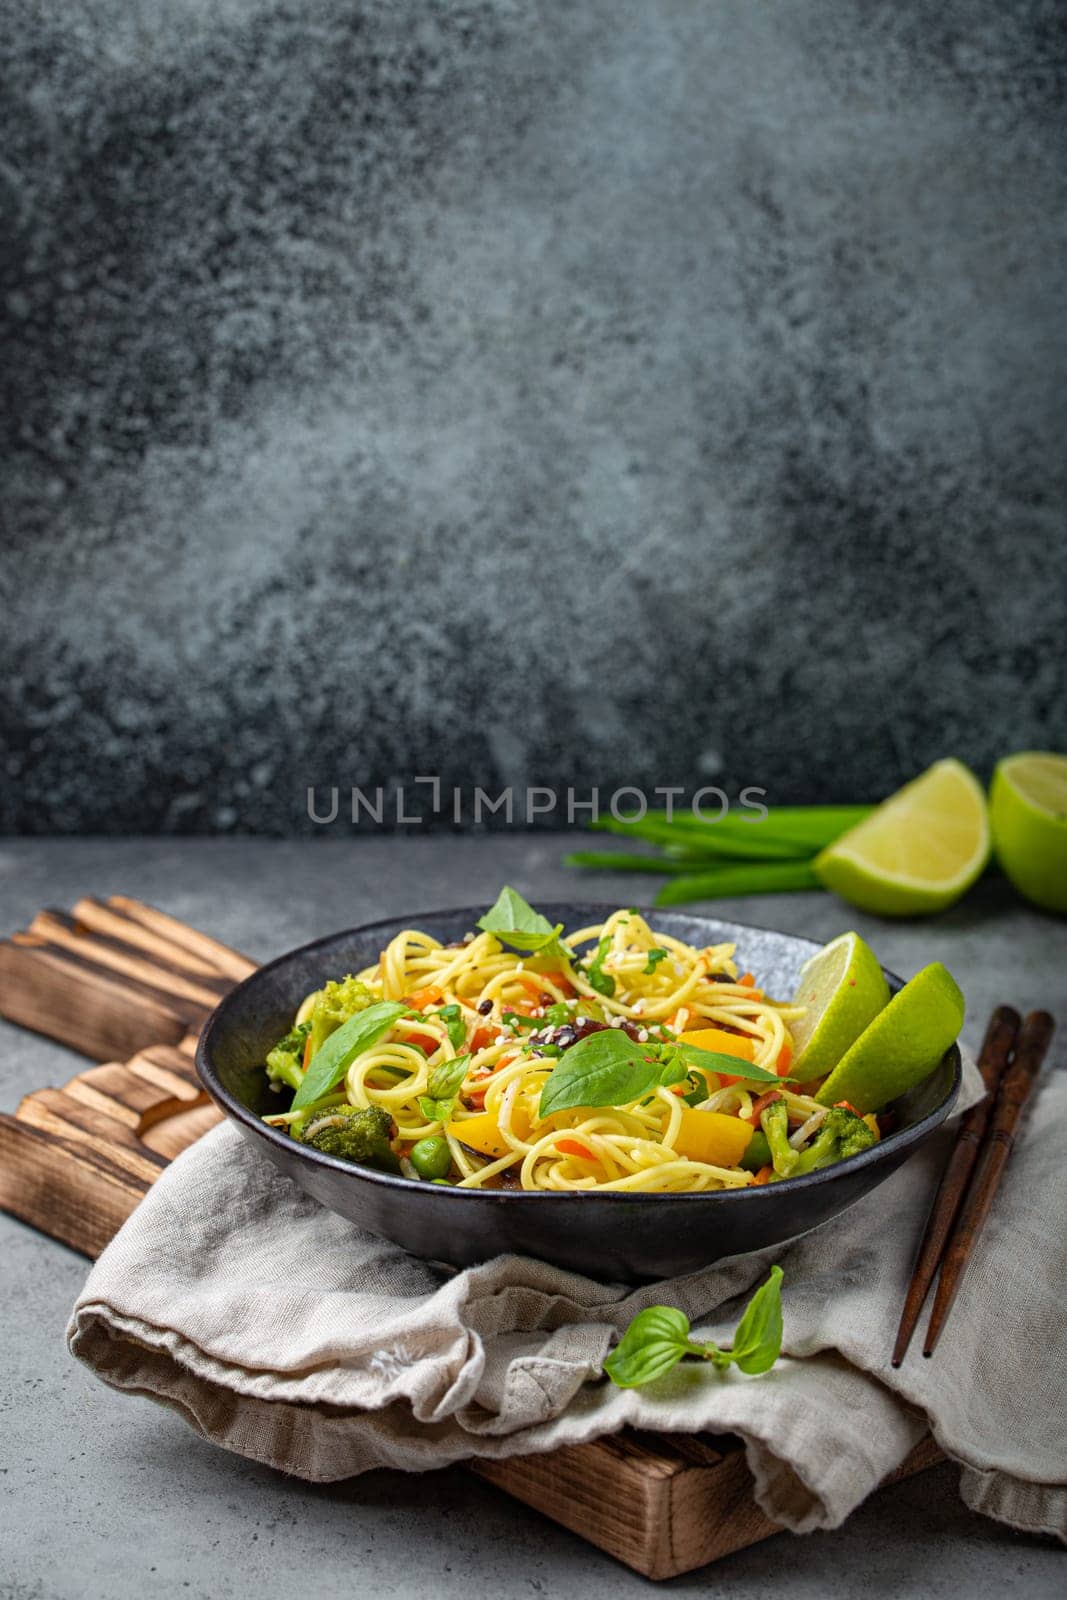 Asian vegetarian noodles with vegetables and lime in black rustic ceramic bowl, wooden chopsticks on cutting board angle view on stone background. Cooking noodles concept